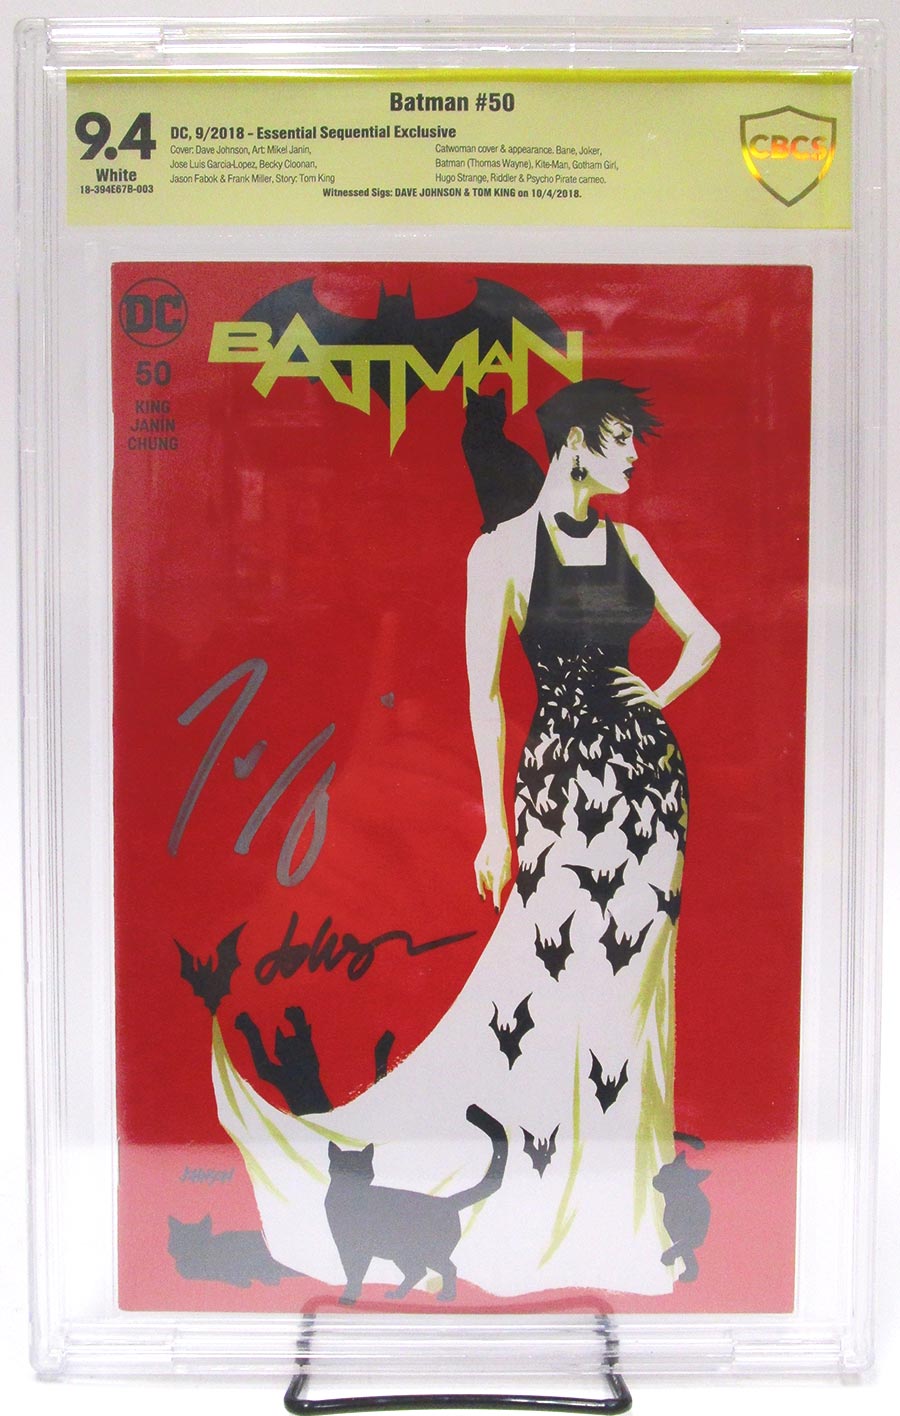 Batman Vol 3 #50 Cover Z-Z Essential Sequential Exclusive Dave Johnson Variant Cover CBCS 9.4 Signed by Dave Johnson and Tom King